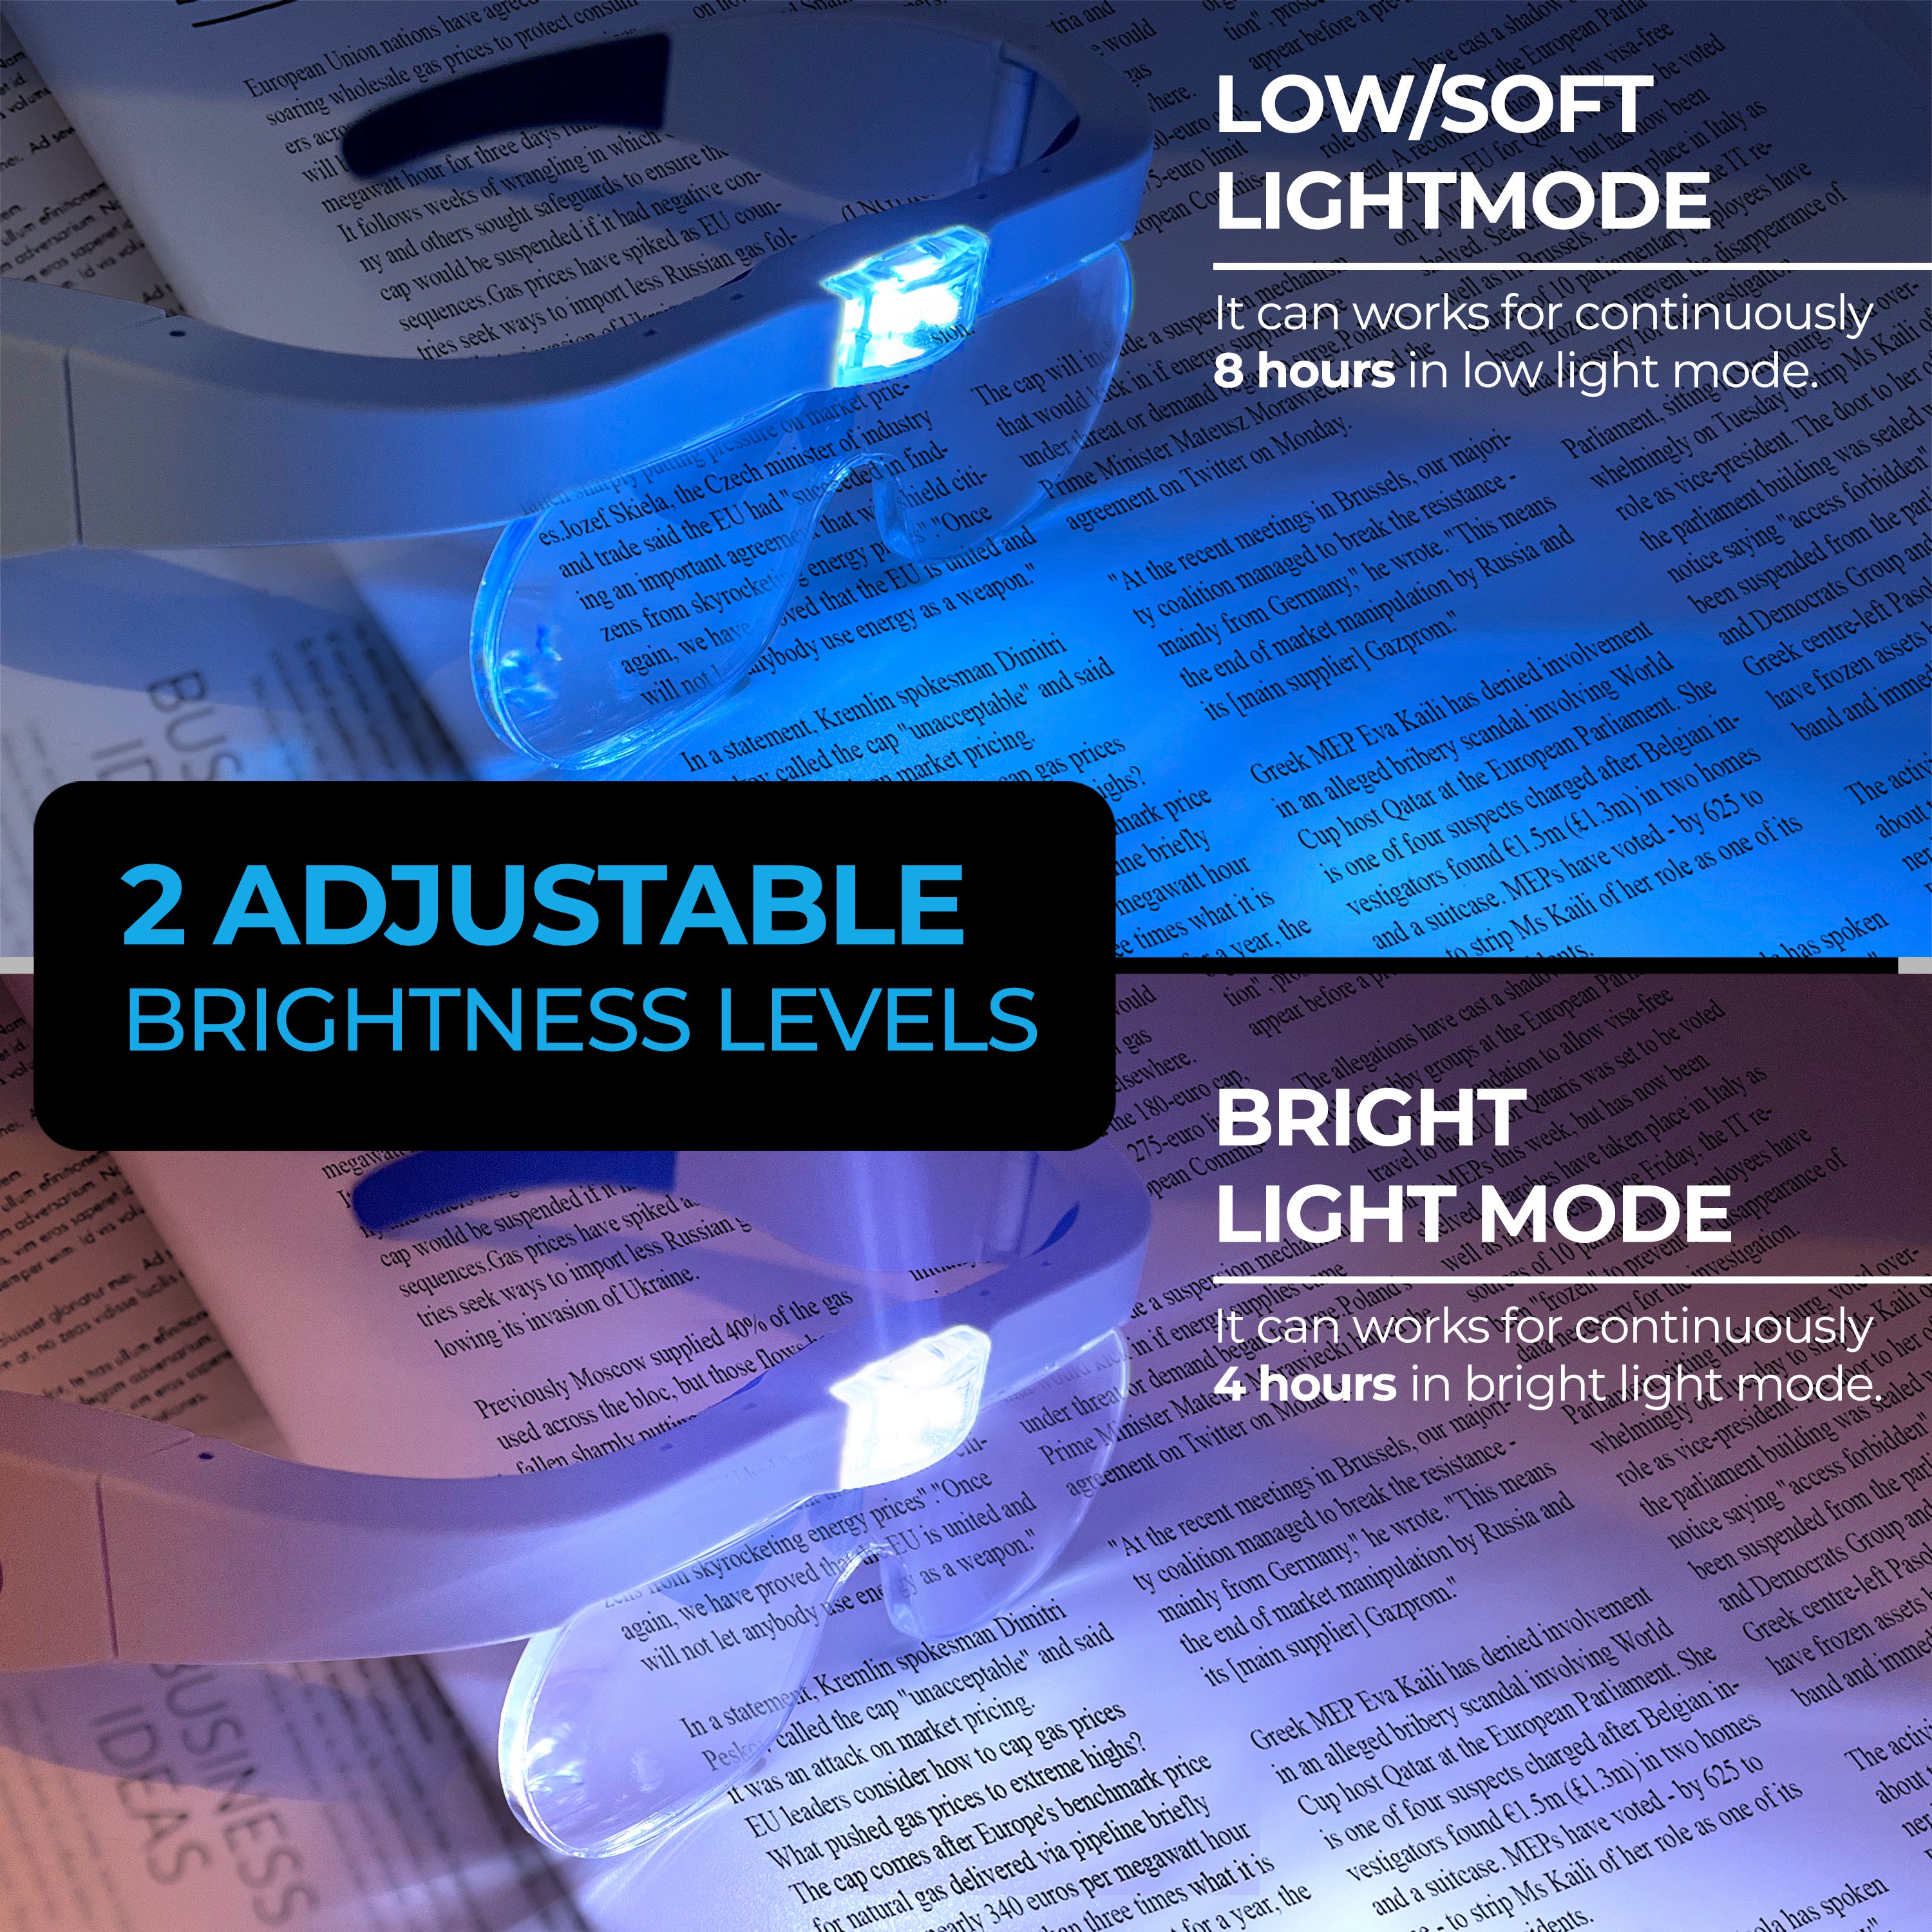 Rechargeable Head Magnifying Glasses with 2 LEDs & 4 Detachable Lenses –  MagniPros